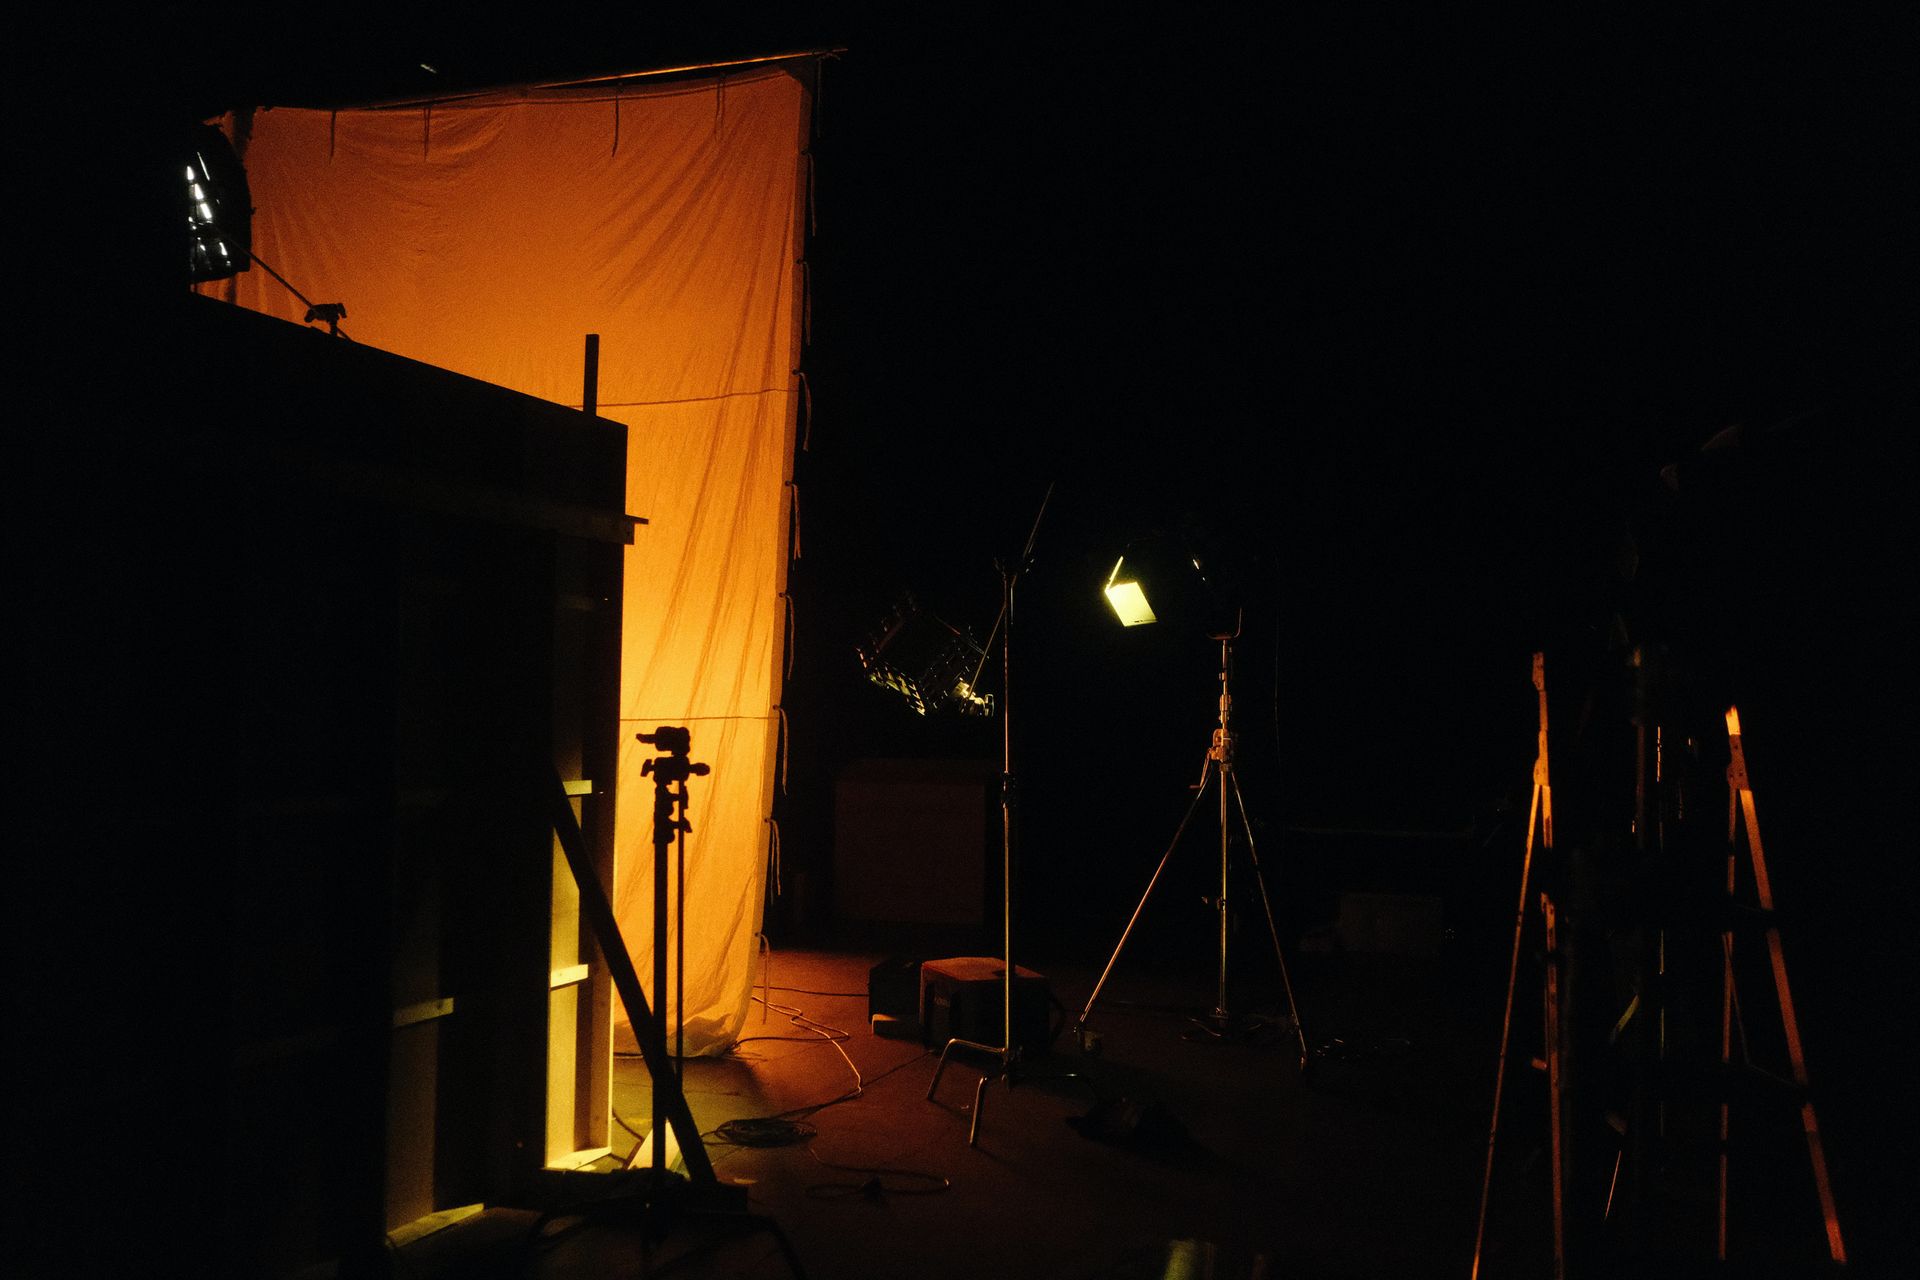 Virtual video production behind the scenes using LED walls